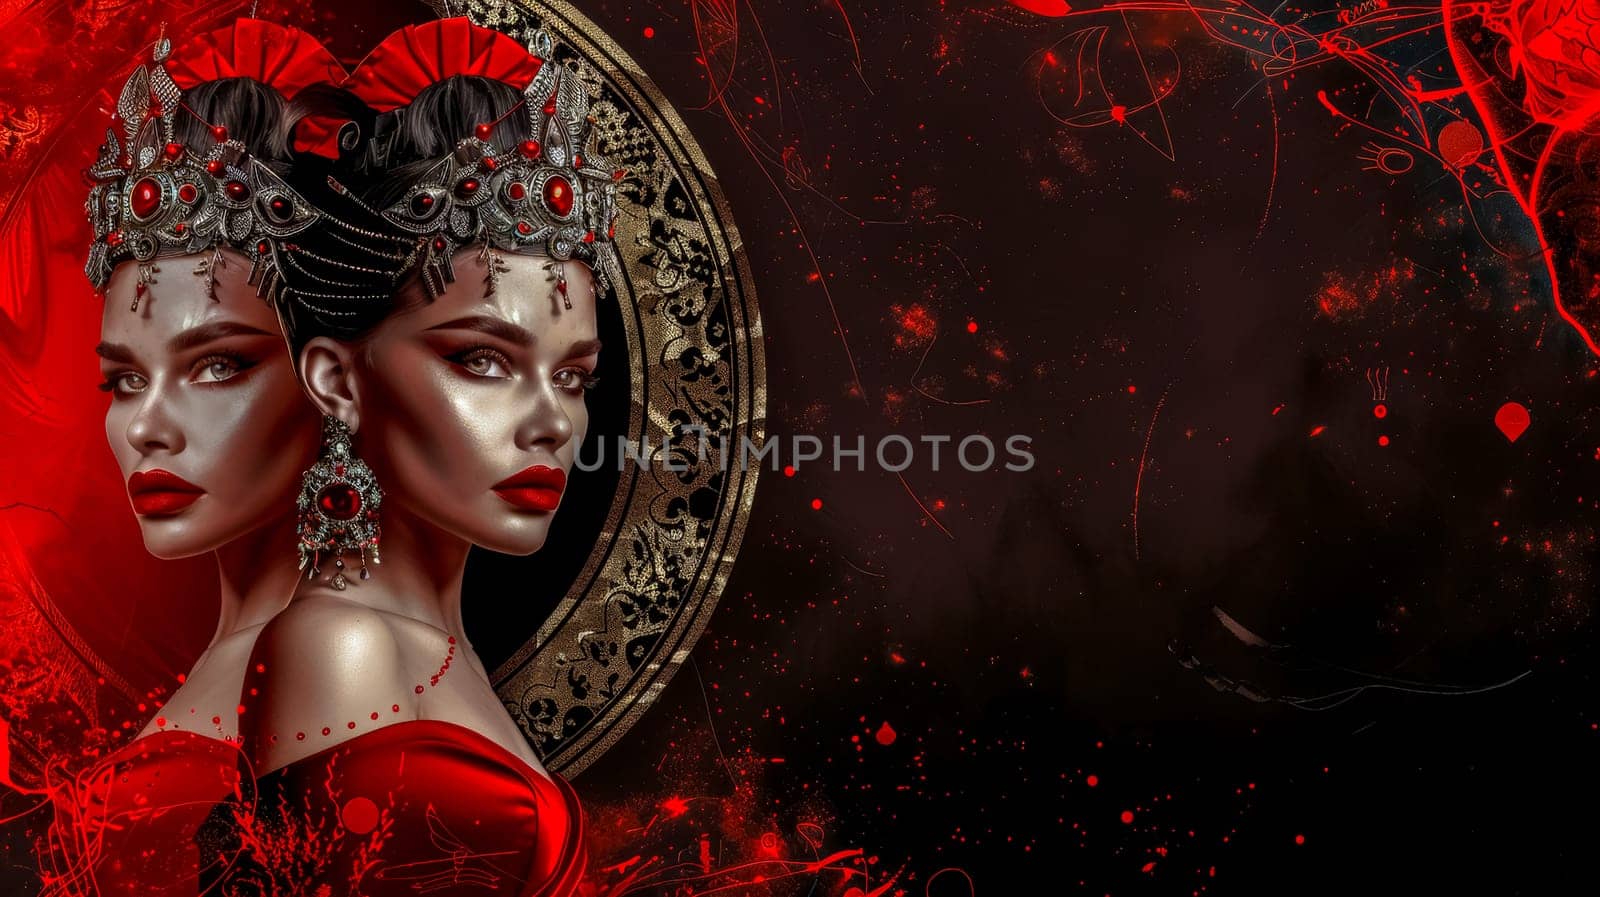 Twin models adorned in gothic makeup and regal attire against a red backdrop by Edophoto